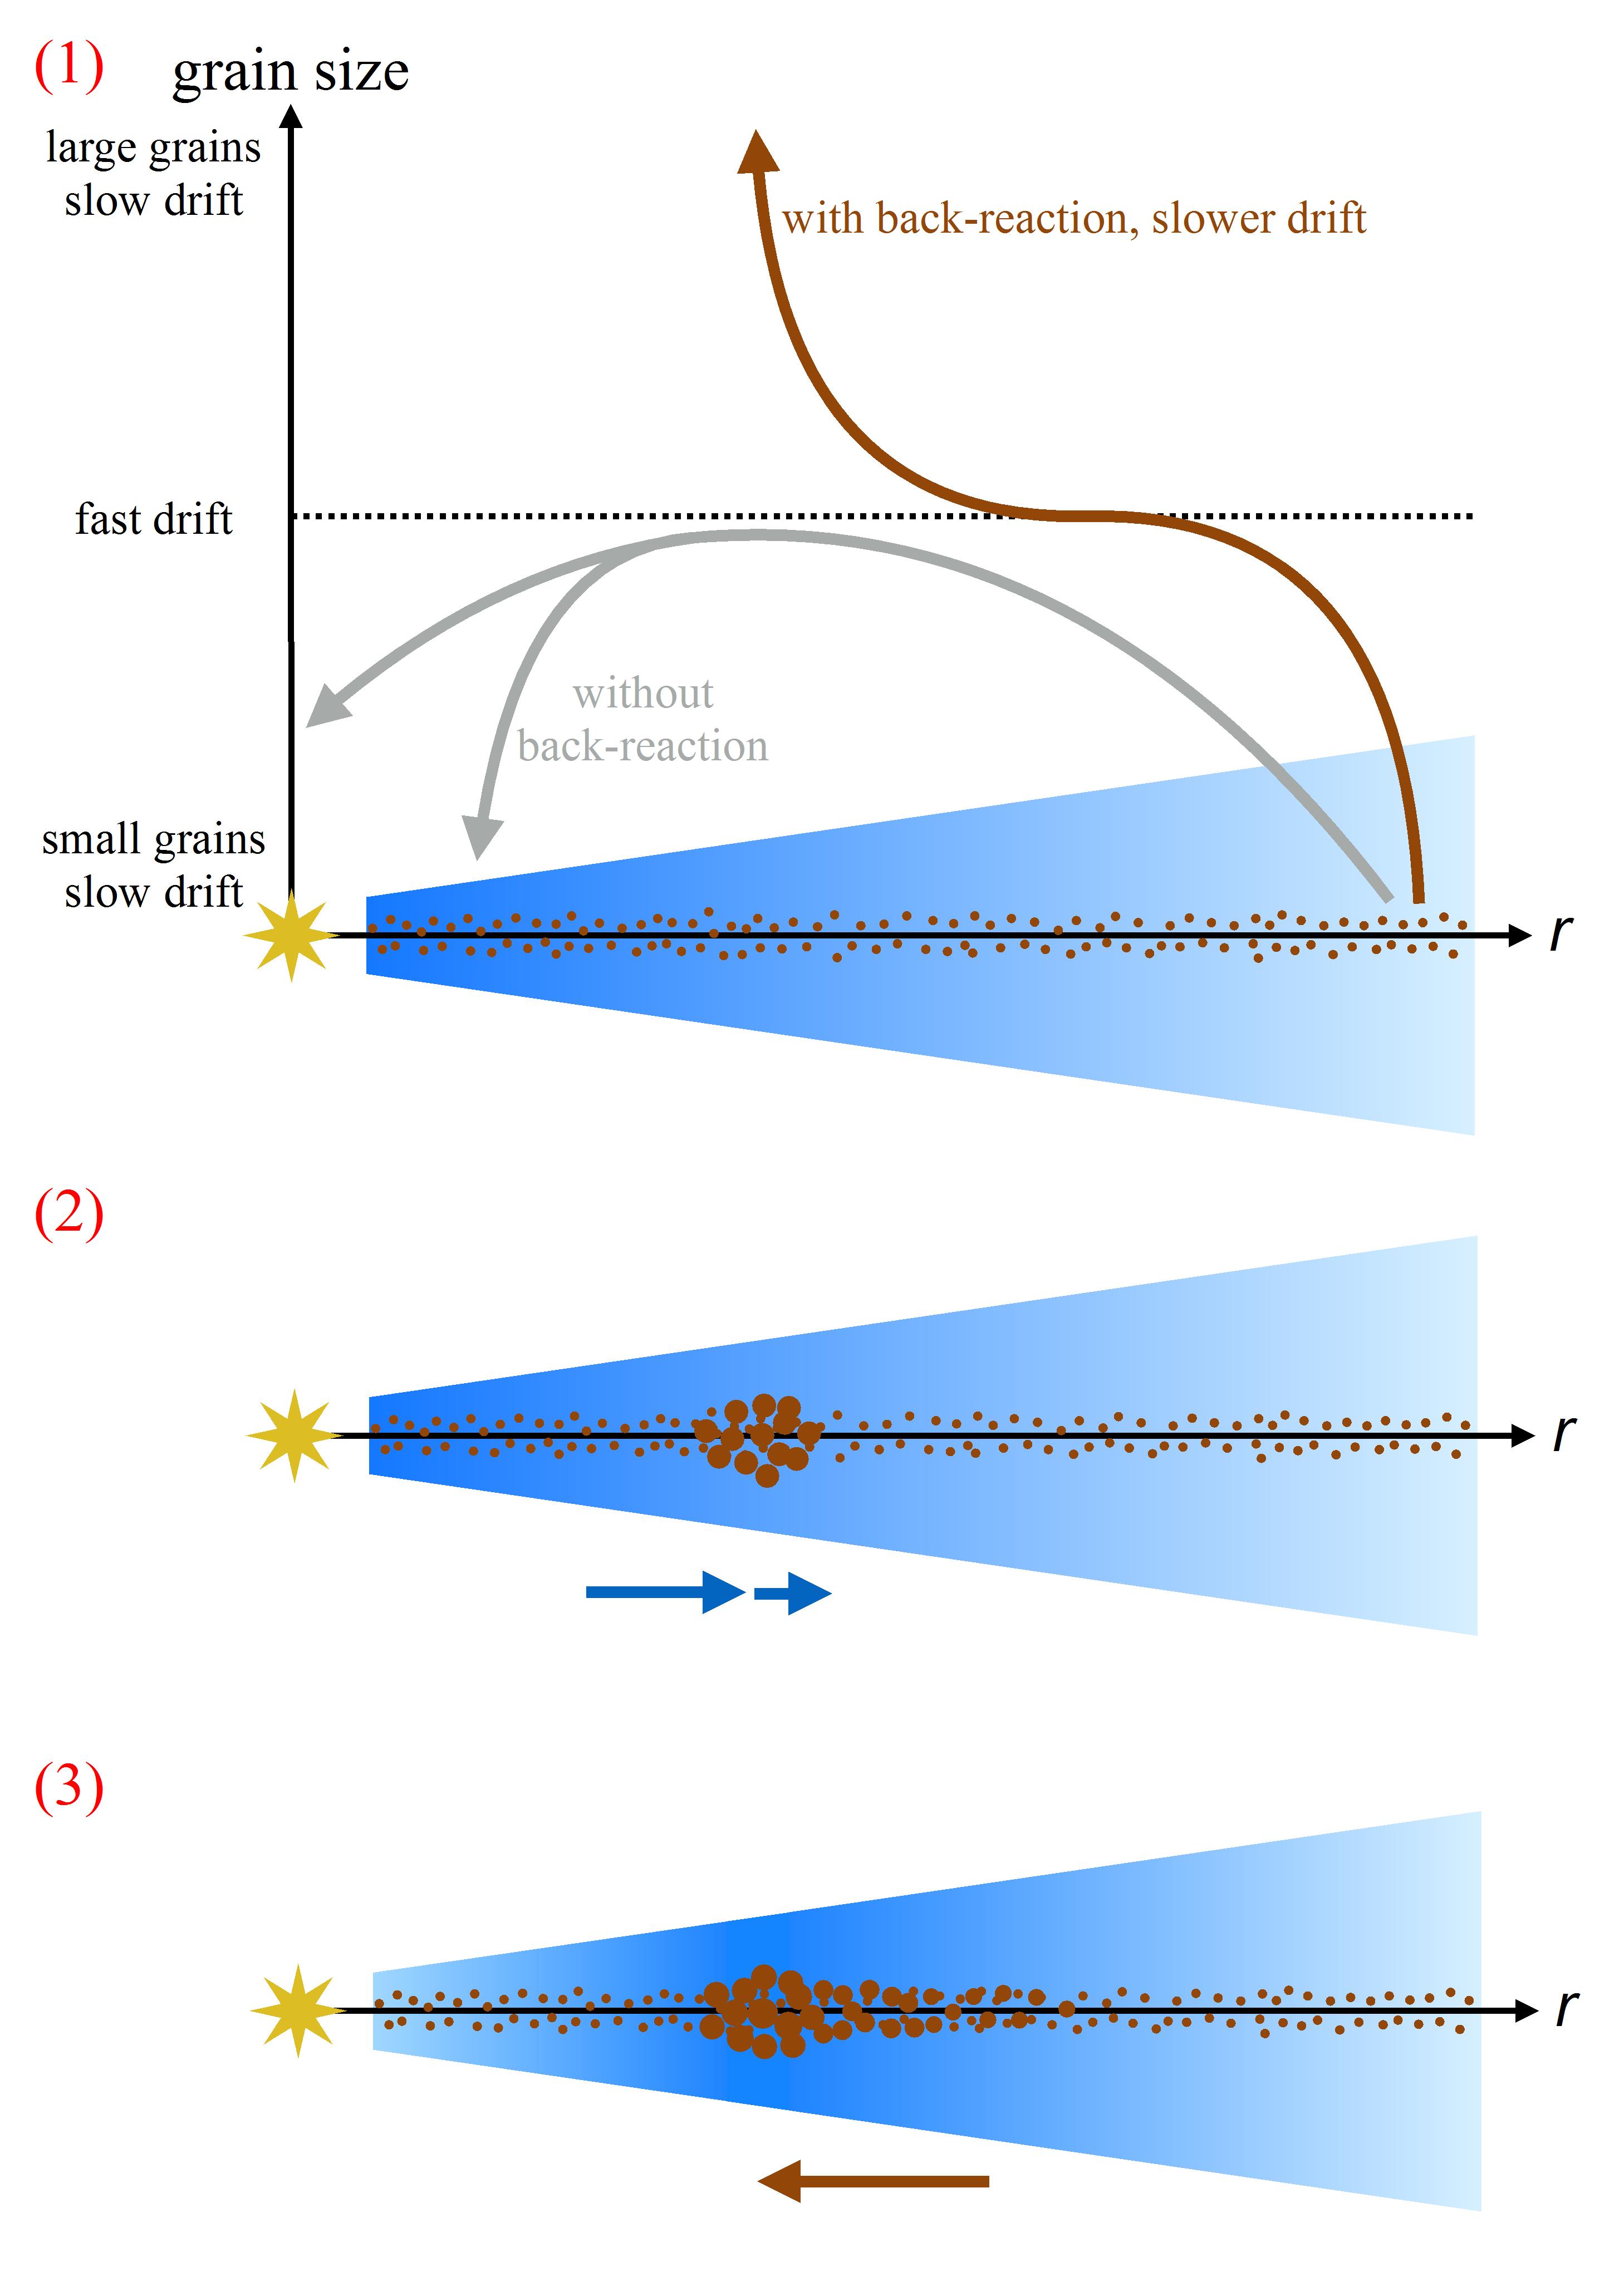 Formation mechanism of spontaneous dust traps